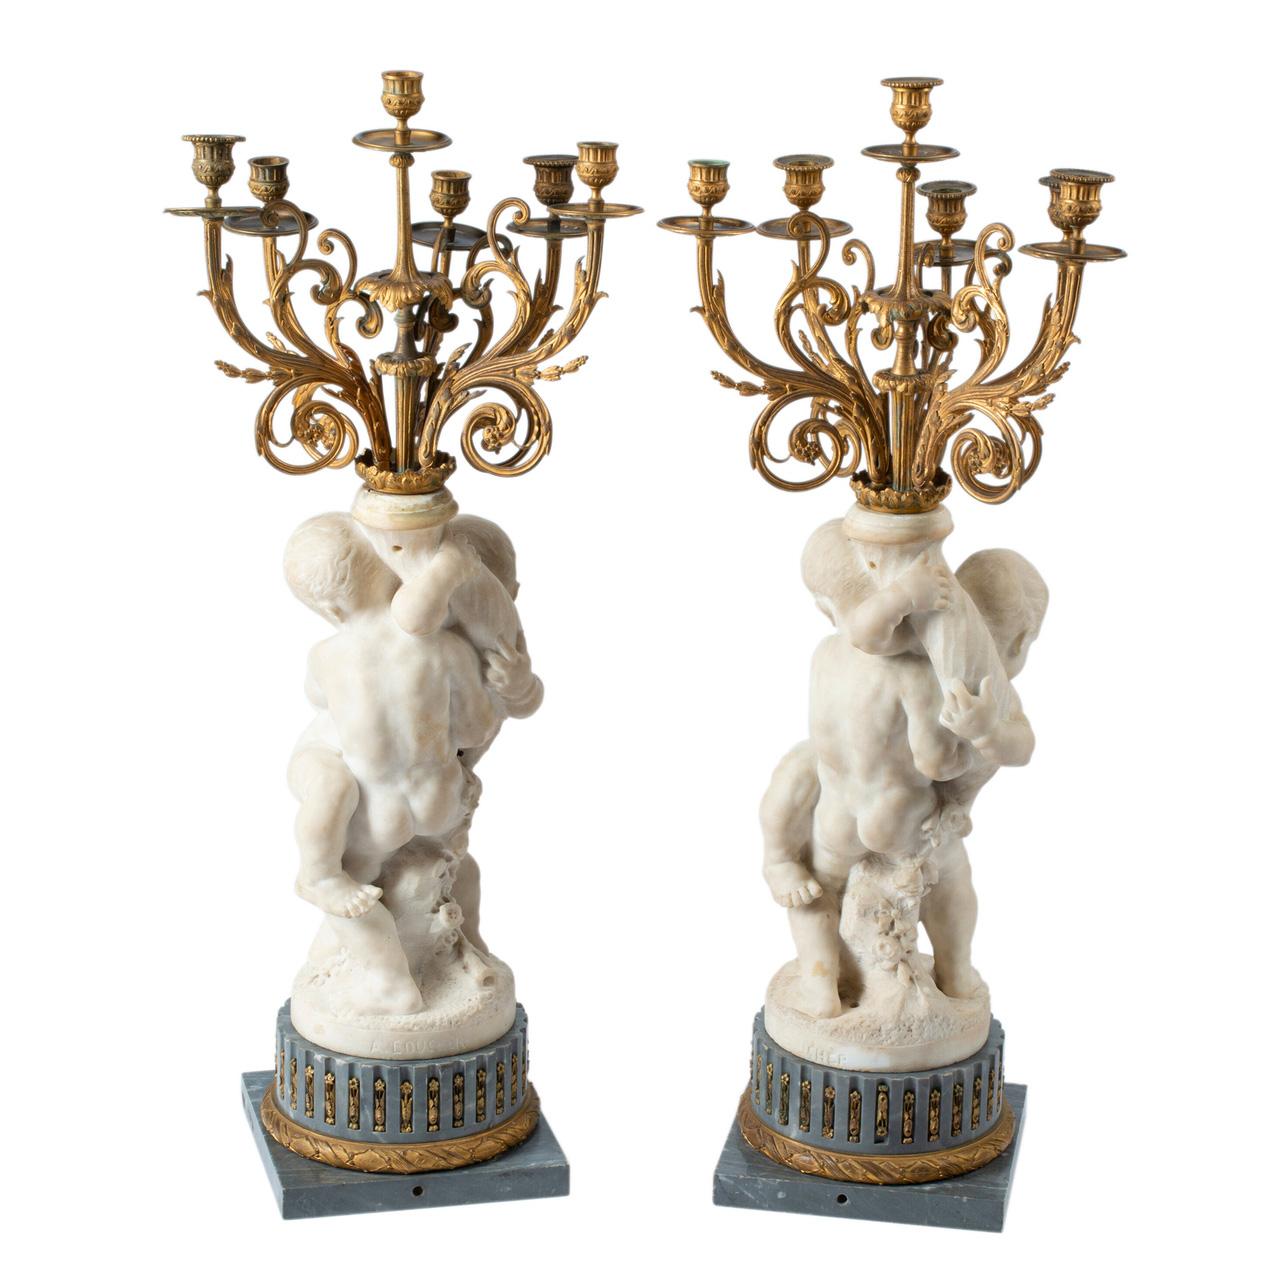 A Fine Quality Pair of French White Marble with fine casting and Gilt Bronze Figural Six-Light Candelabras on Marble Bases signed 'A. BOUCHER'. 

Maker: Alfred Boucher (1850-1934)
Origin: French
Date: 19th century
Dimension: 35 1/2 in. x 14 in.